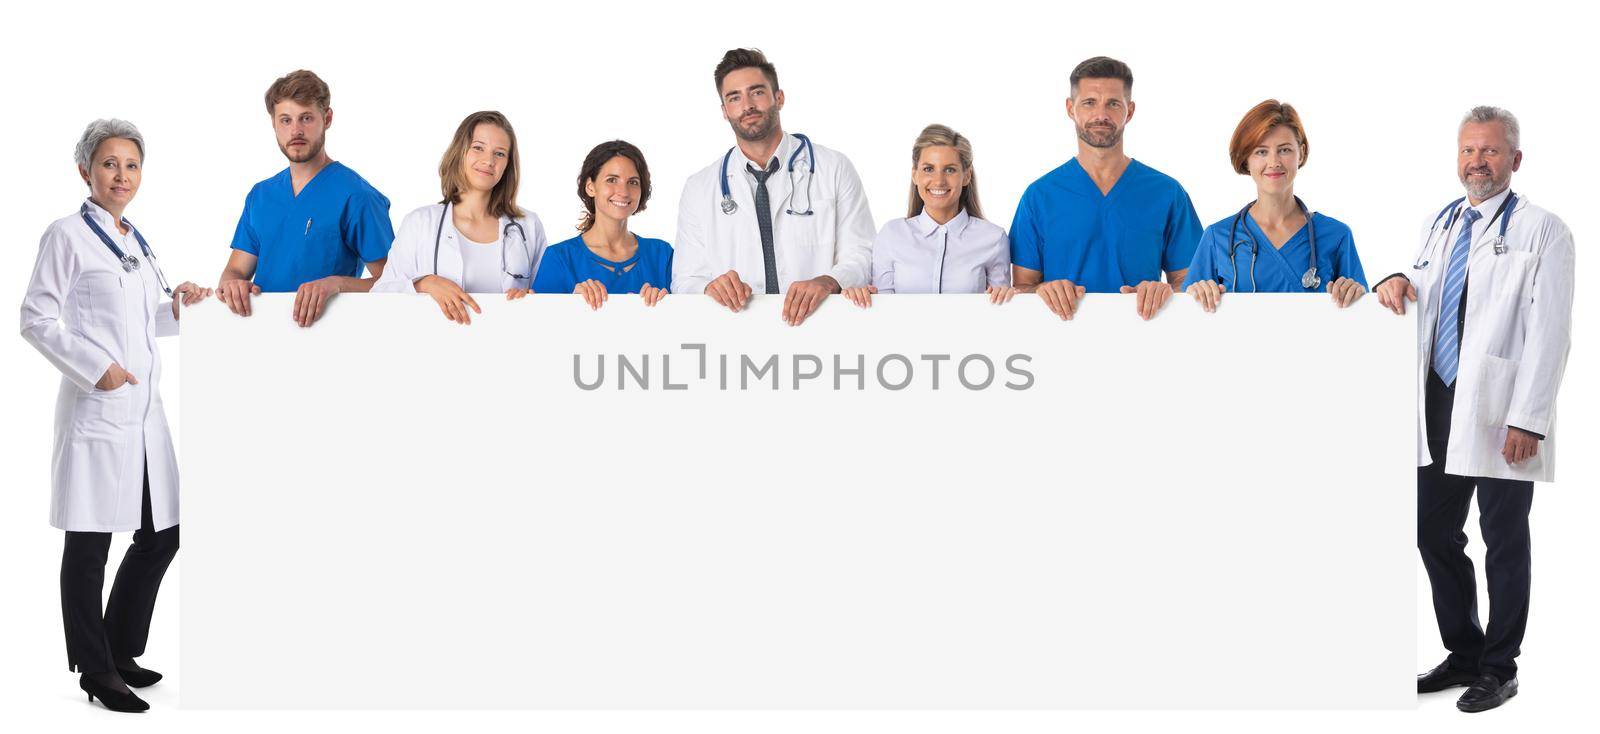 Group of doctors and nurses presenting empty banner. Isolated on white background, copy space for your text content